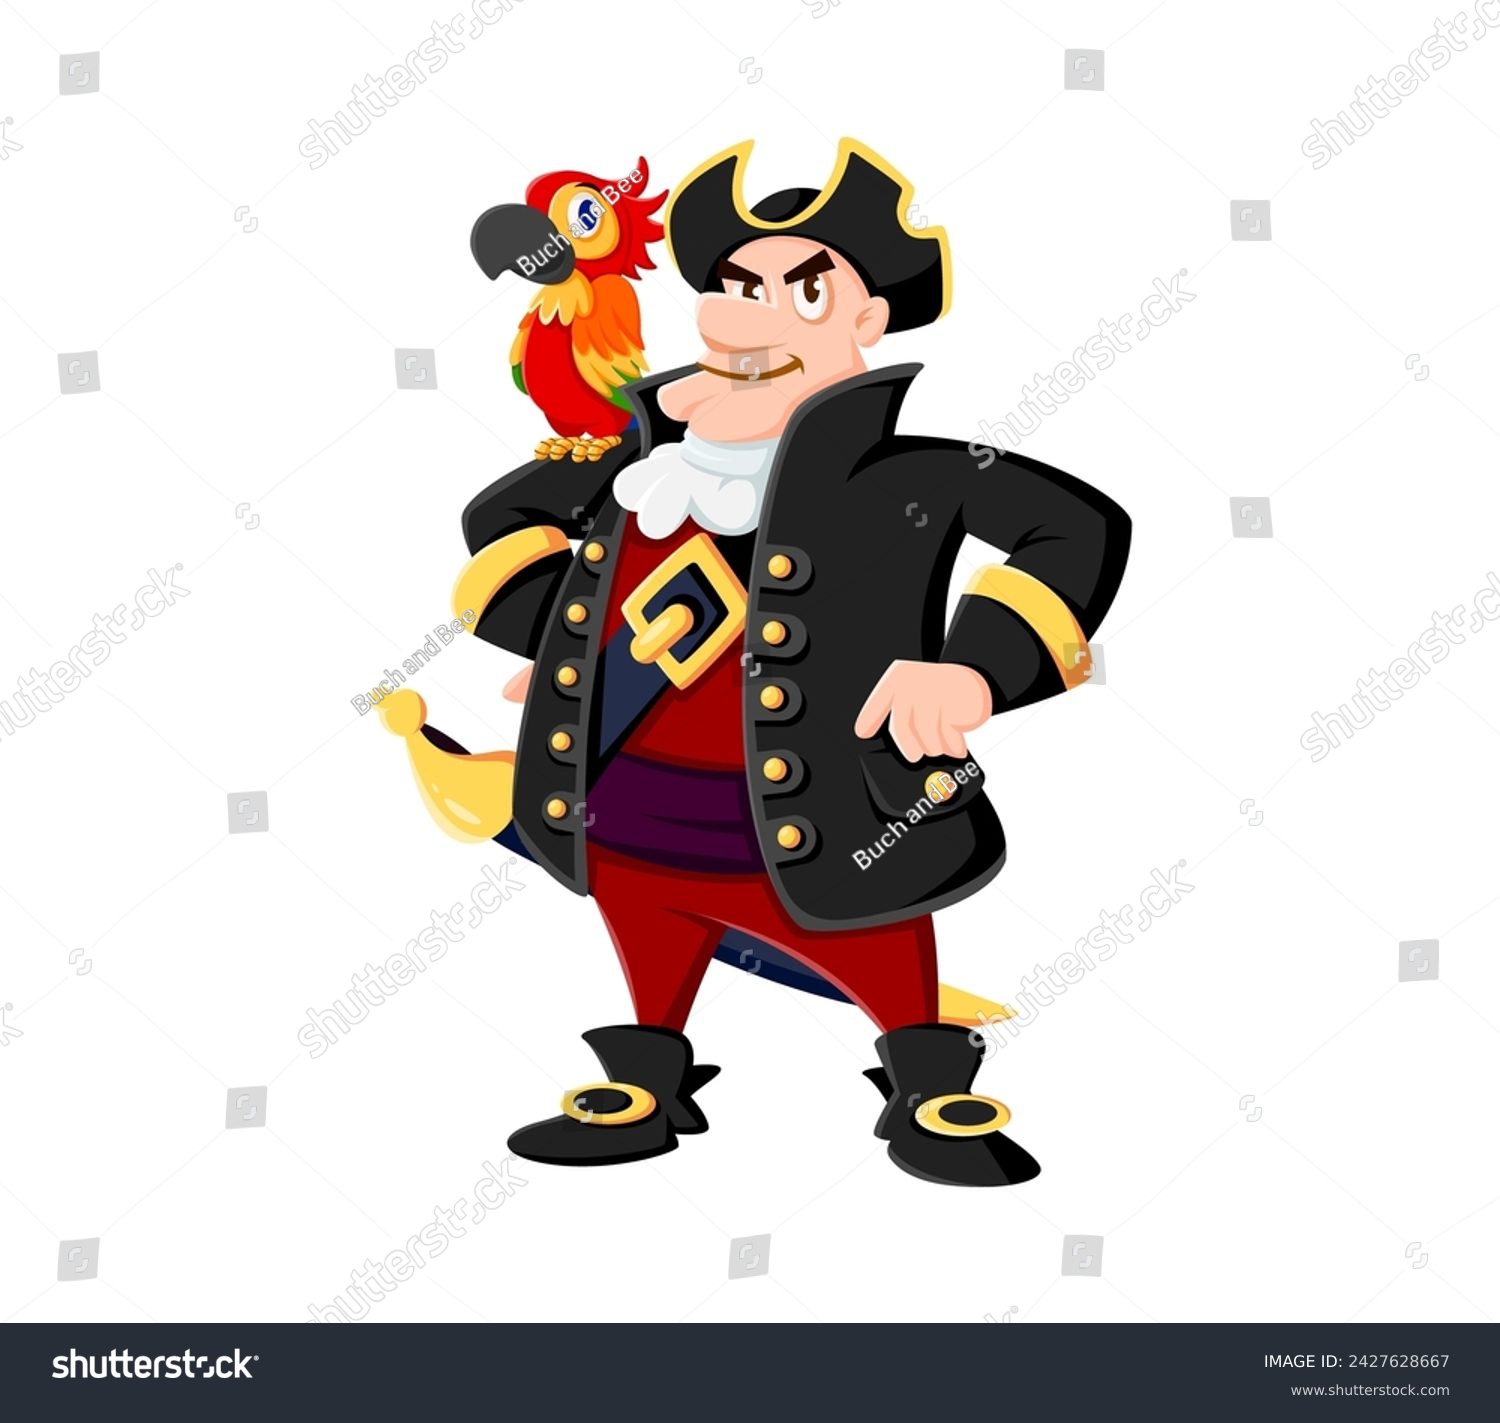 SVG of Cartoon sea pirate and corsair captain character with parrot. Isolated vector charismatic buccaneer personage in traditional hat and costume, confidently stands with colorful bird perched on shoulder svg